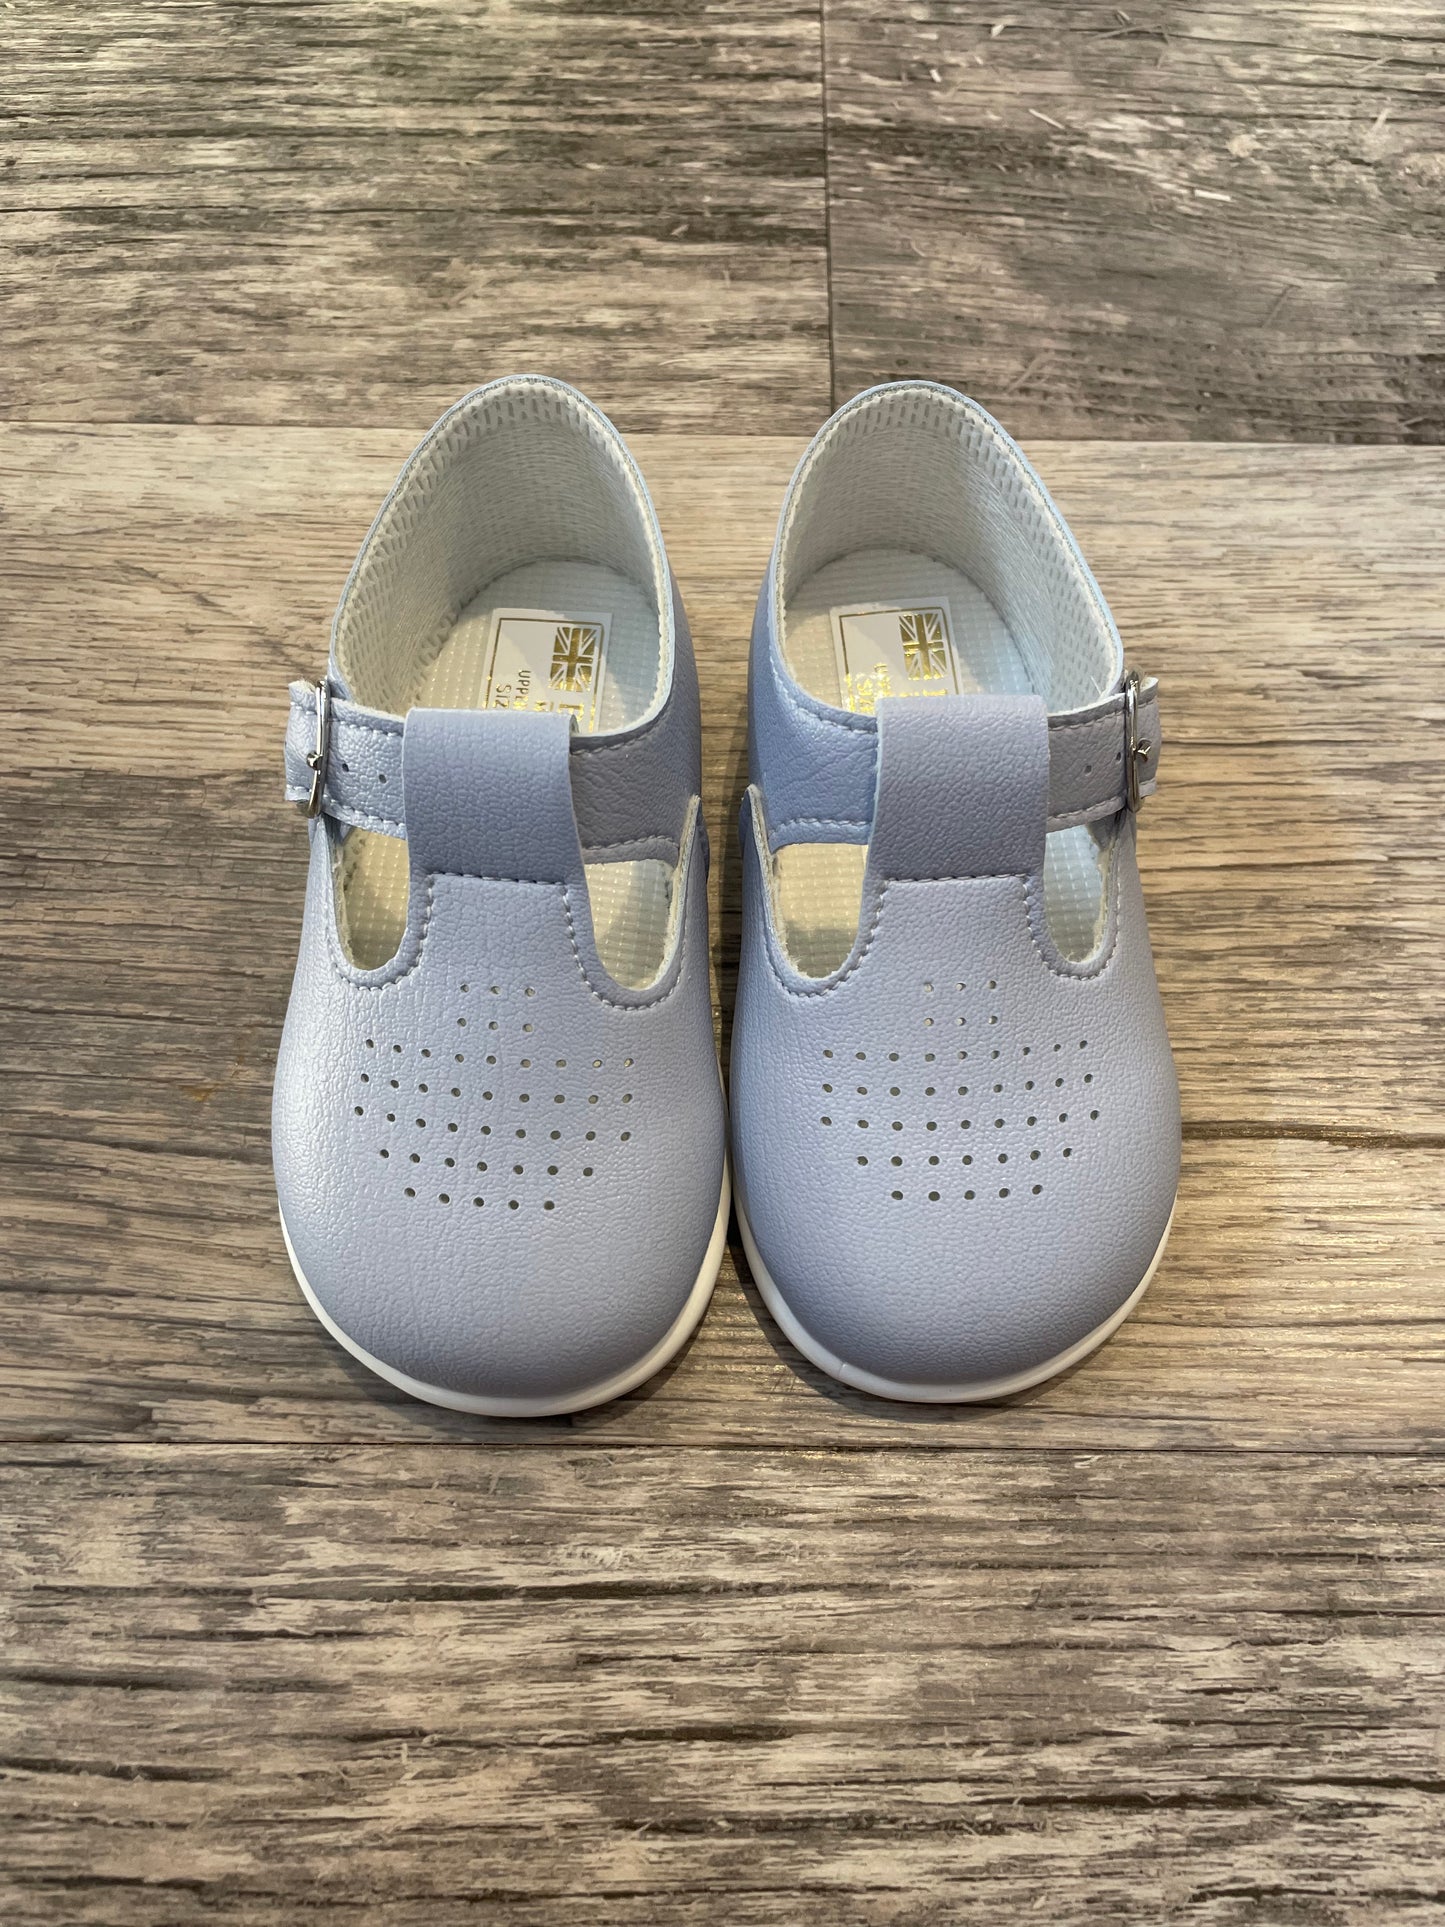 Baby blue hard sole shoes